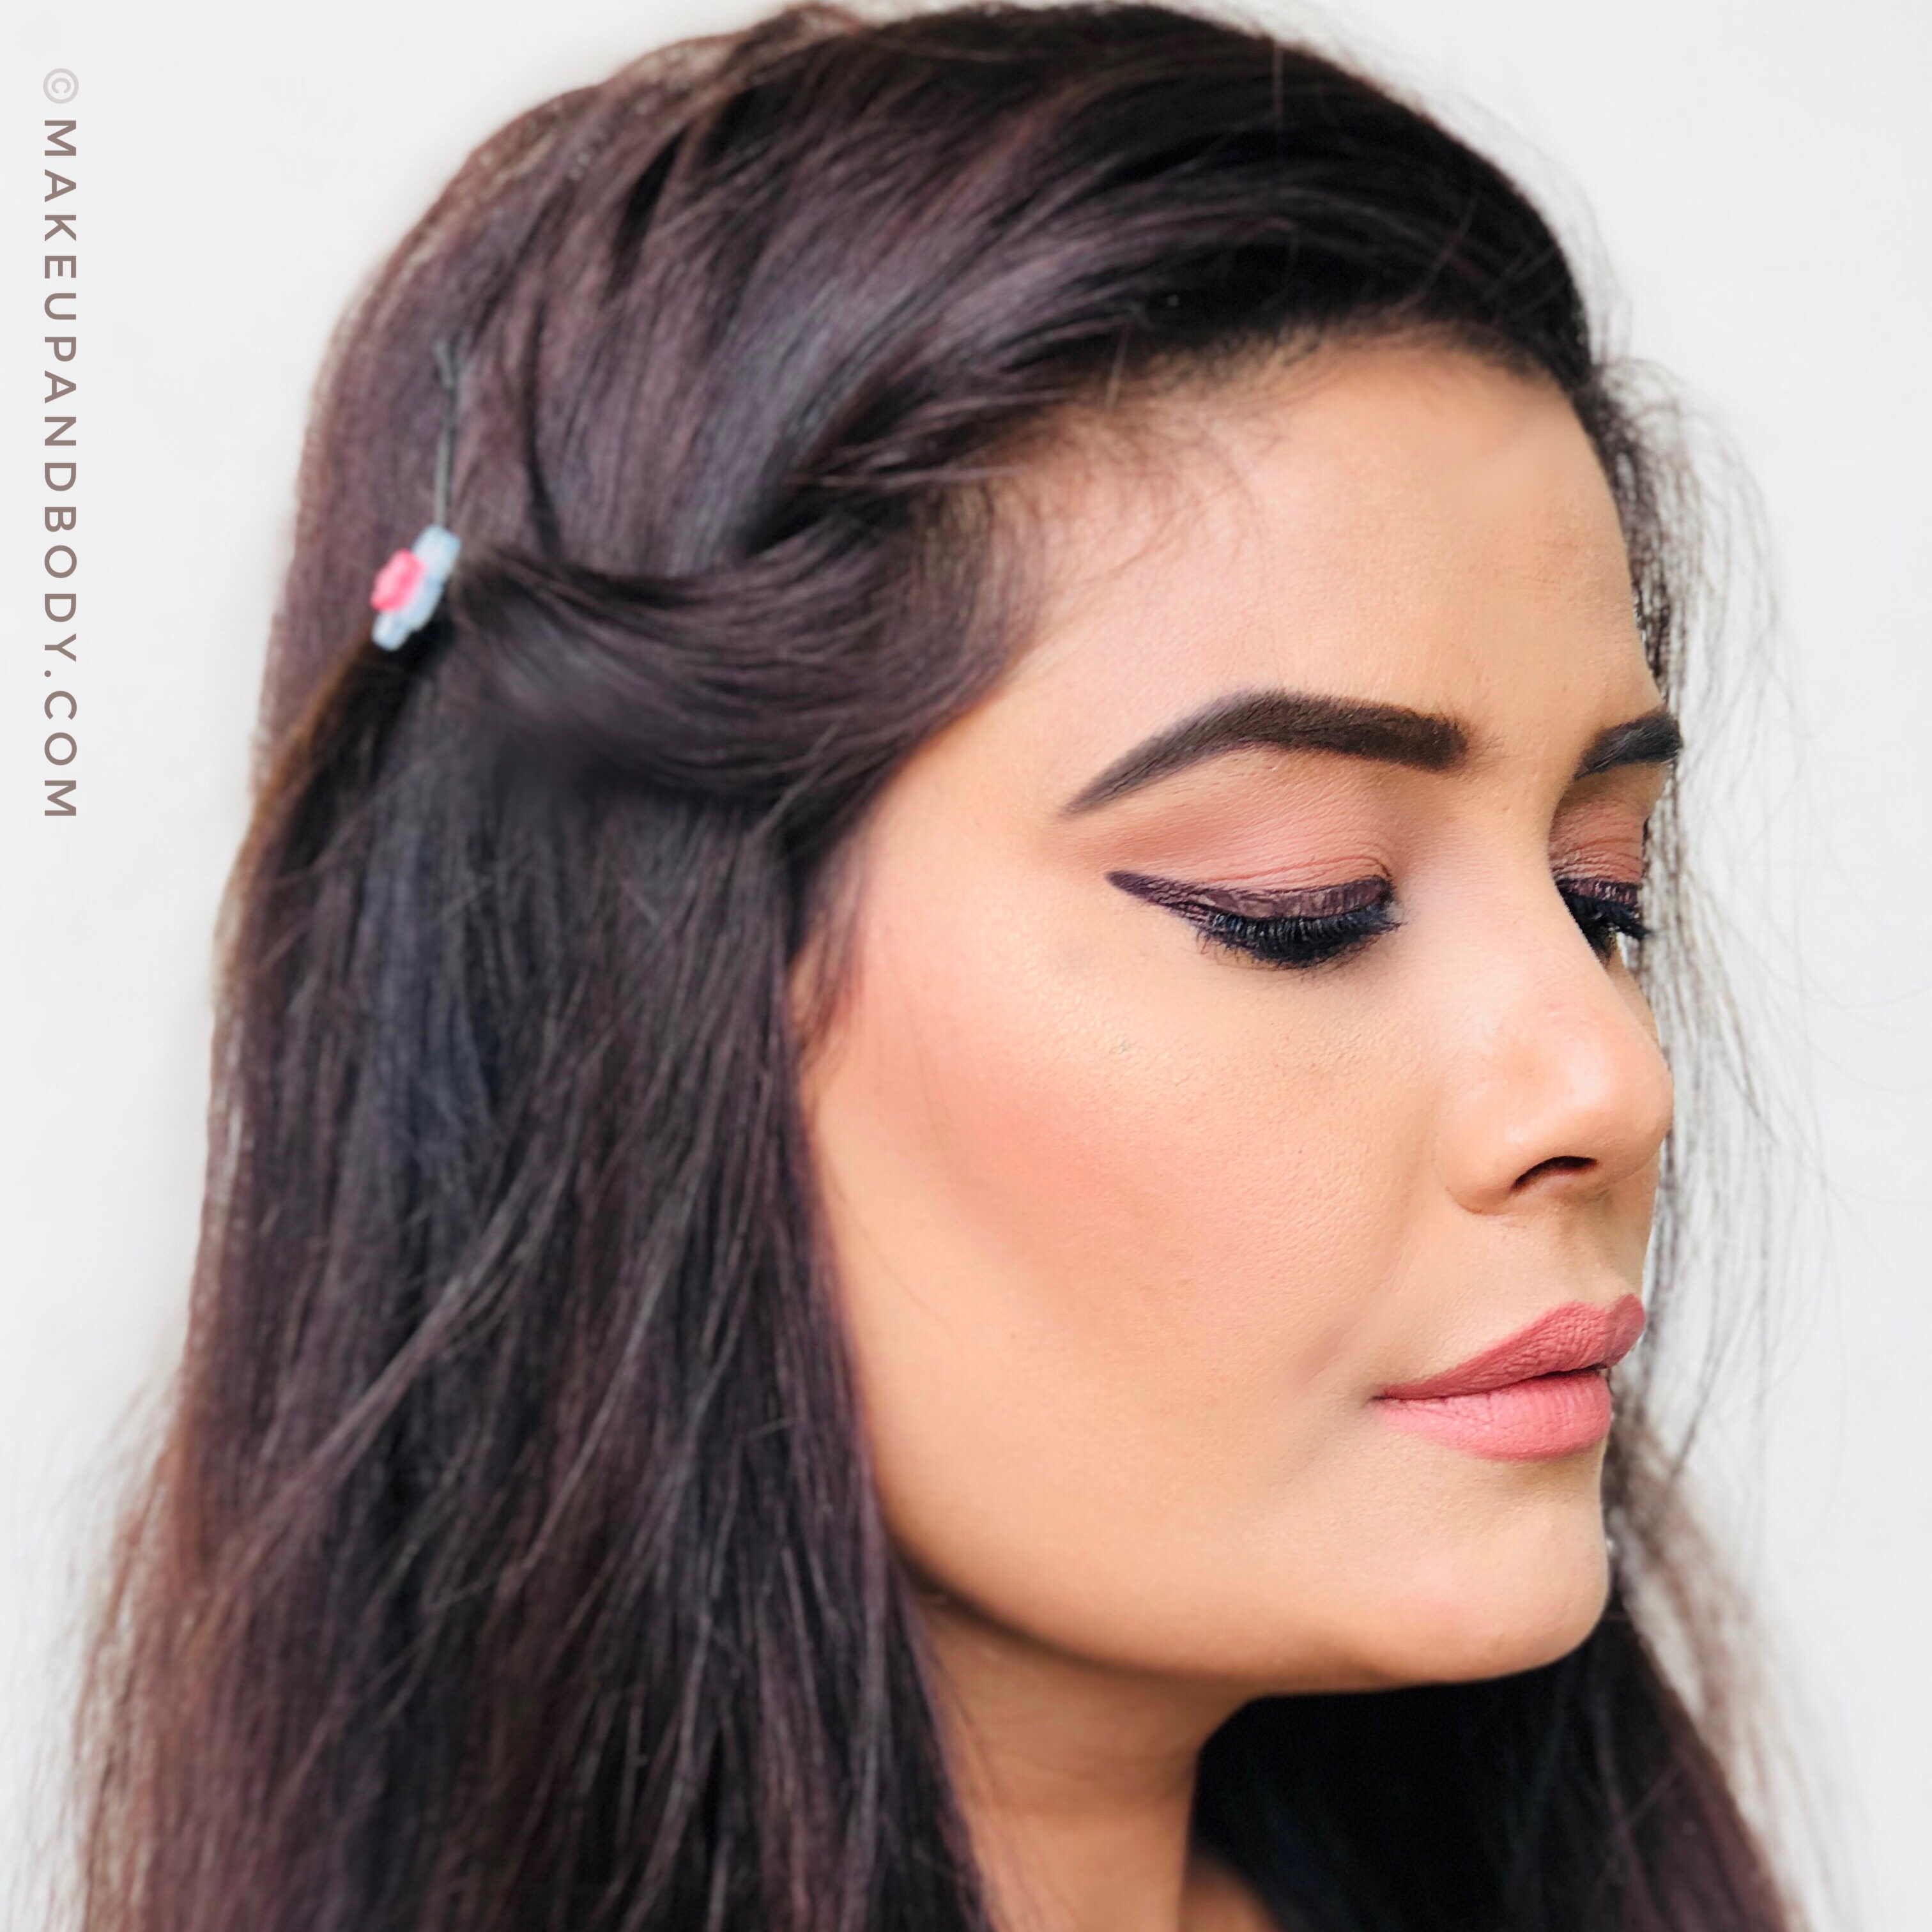 Plum NaturStudio All-Day-Wear Kohl Kajal- Uptown Brown & Gemstone Green-Review and Swatches